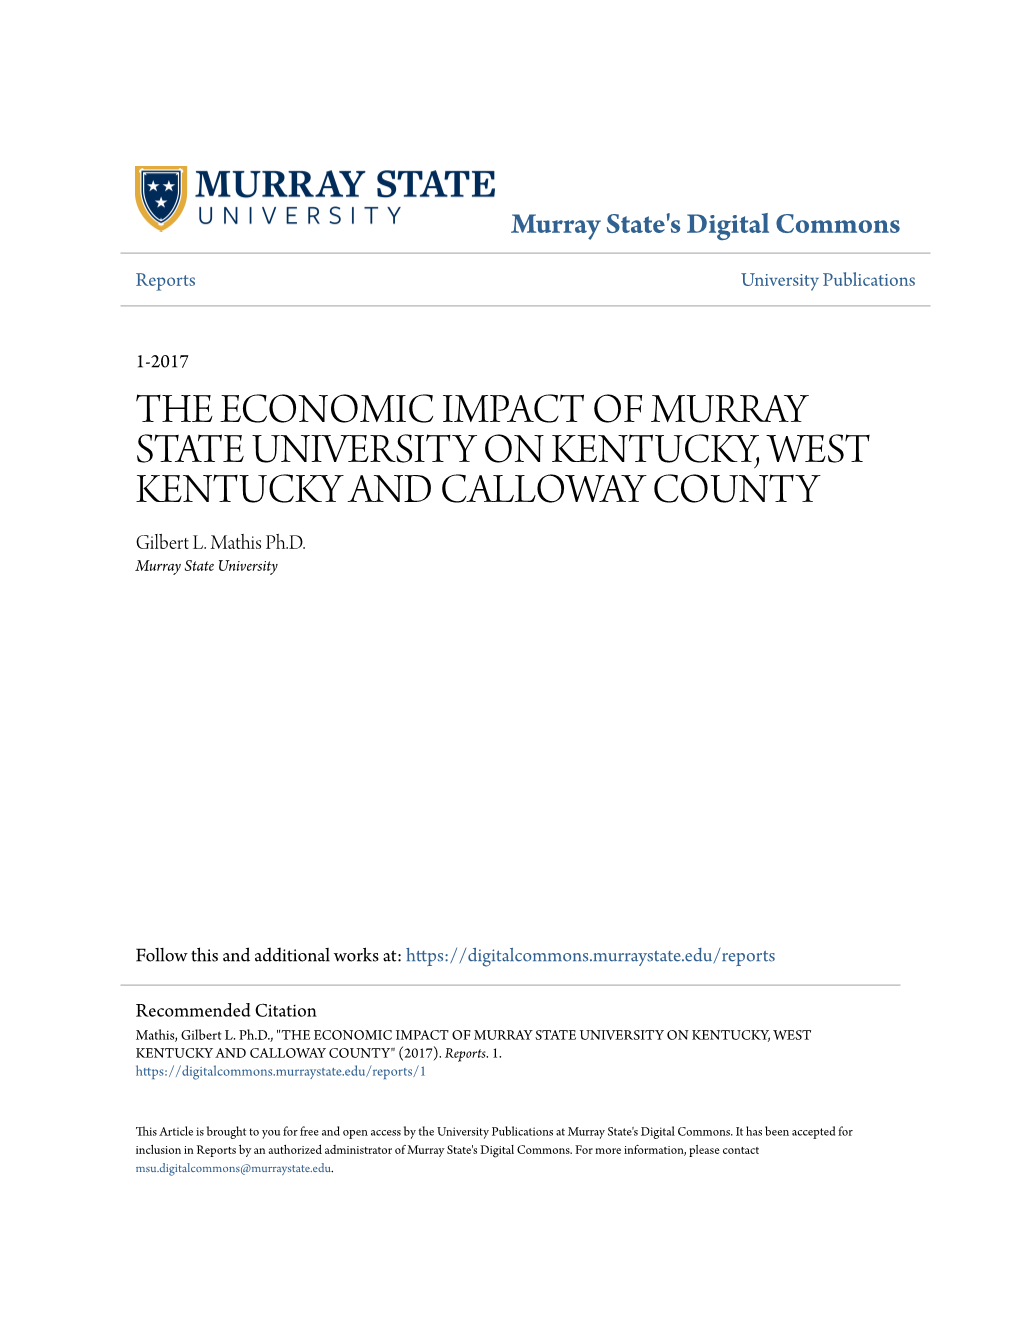 THE ECONOMIC IMPACT of MURRAY STATE UNIVERSITY on KENTUCKY, WEST KENTUCKY and CALLOWAY COUNTY Gilbert L